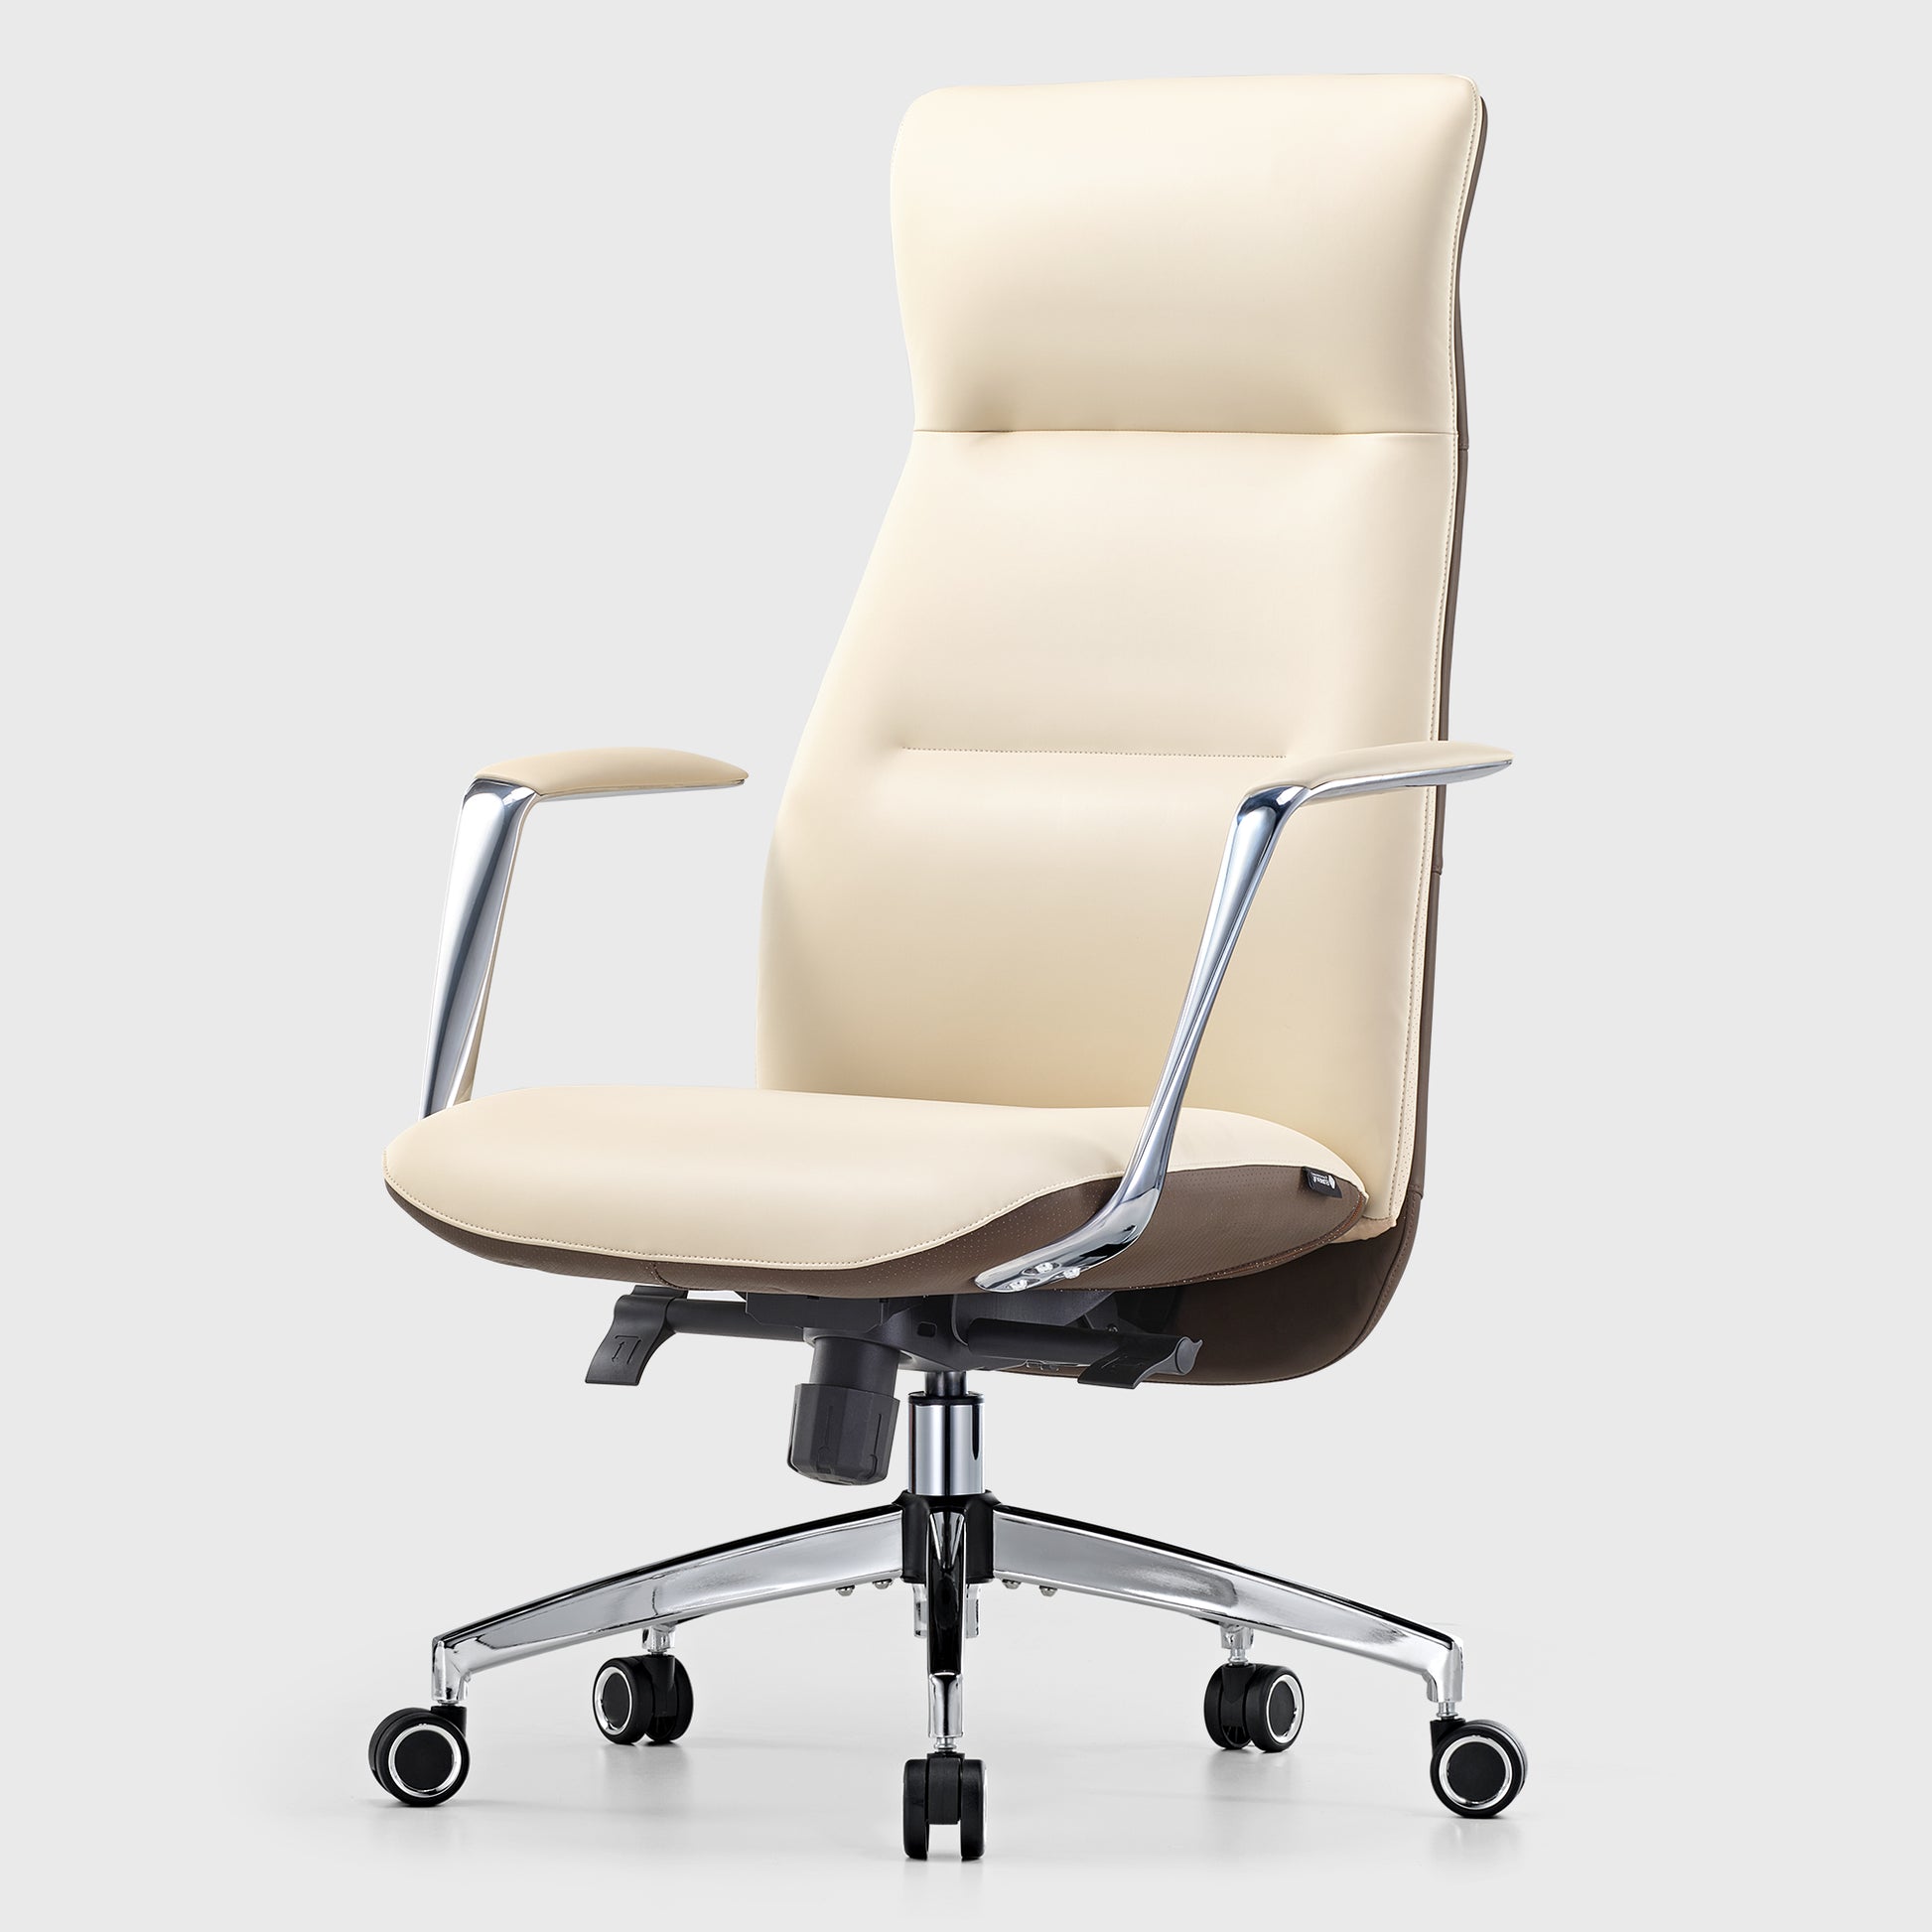 Royal Slim OC08 Leather High Back Executive Office Chair, Beige White High End Office